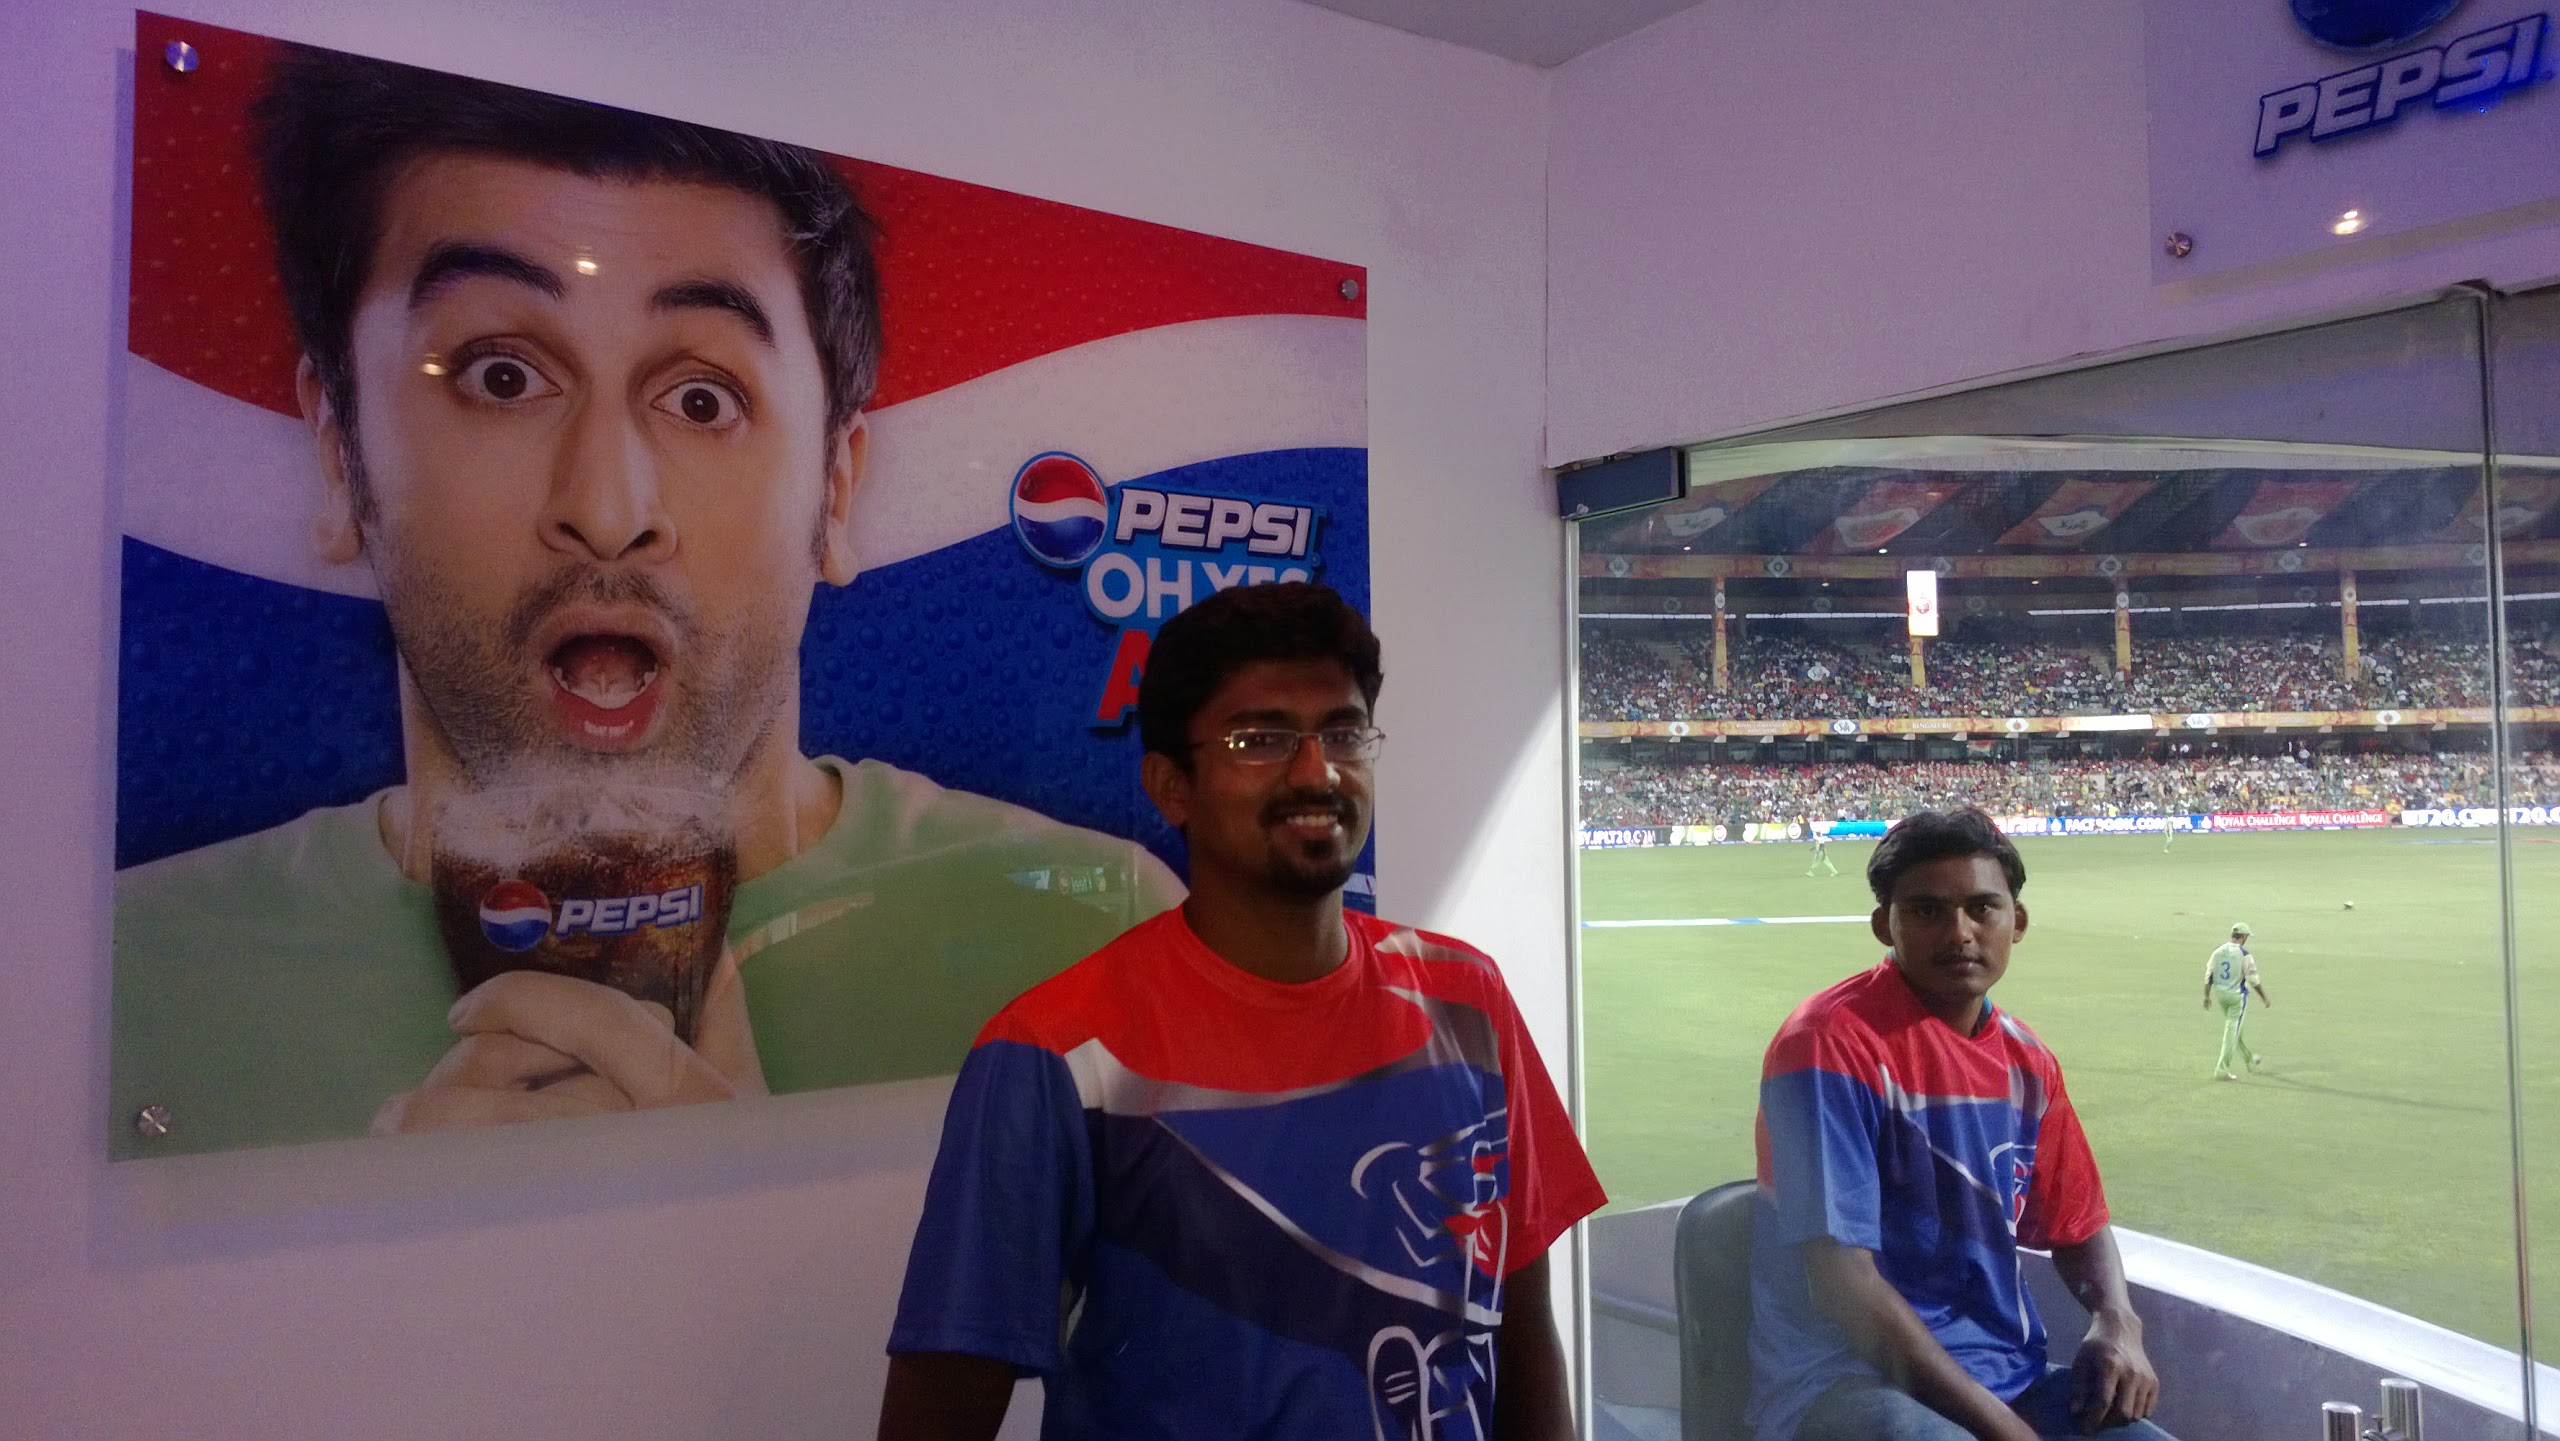 Match Experience at the PEPSI IPL VIP Box | Mission Sharing Knowledge